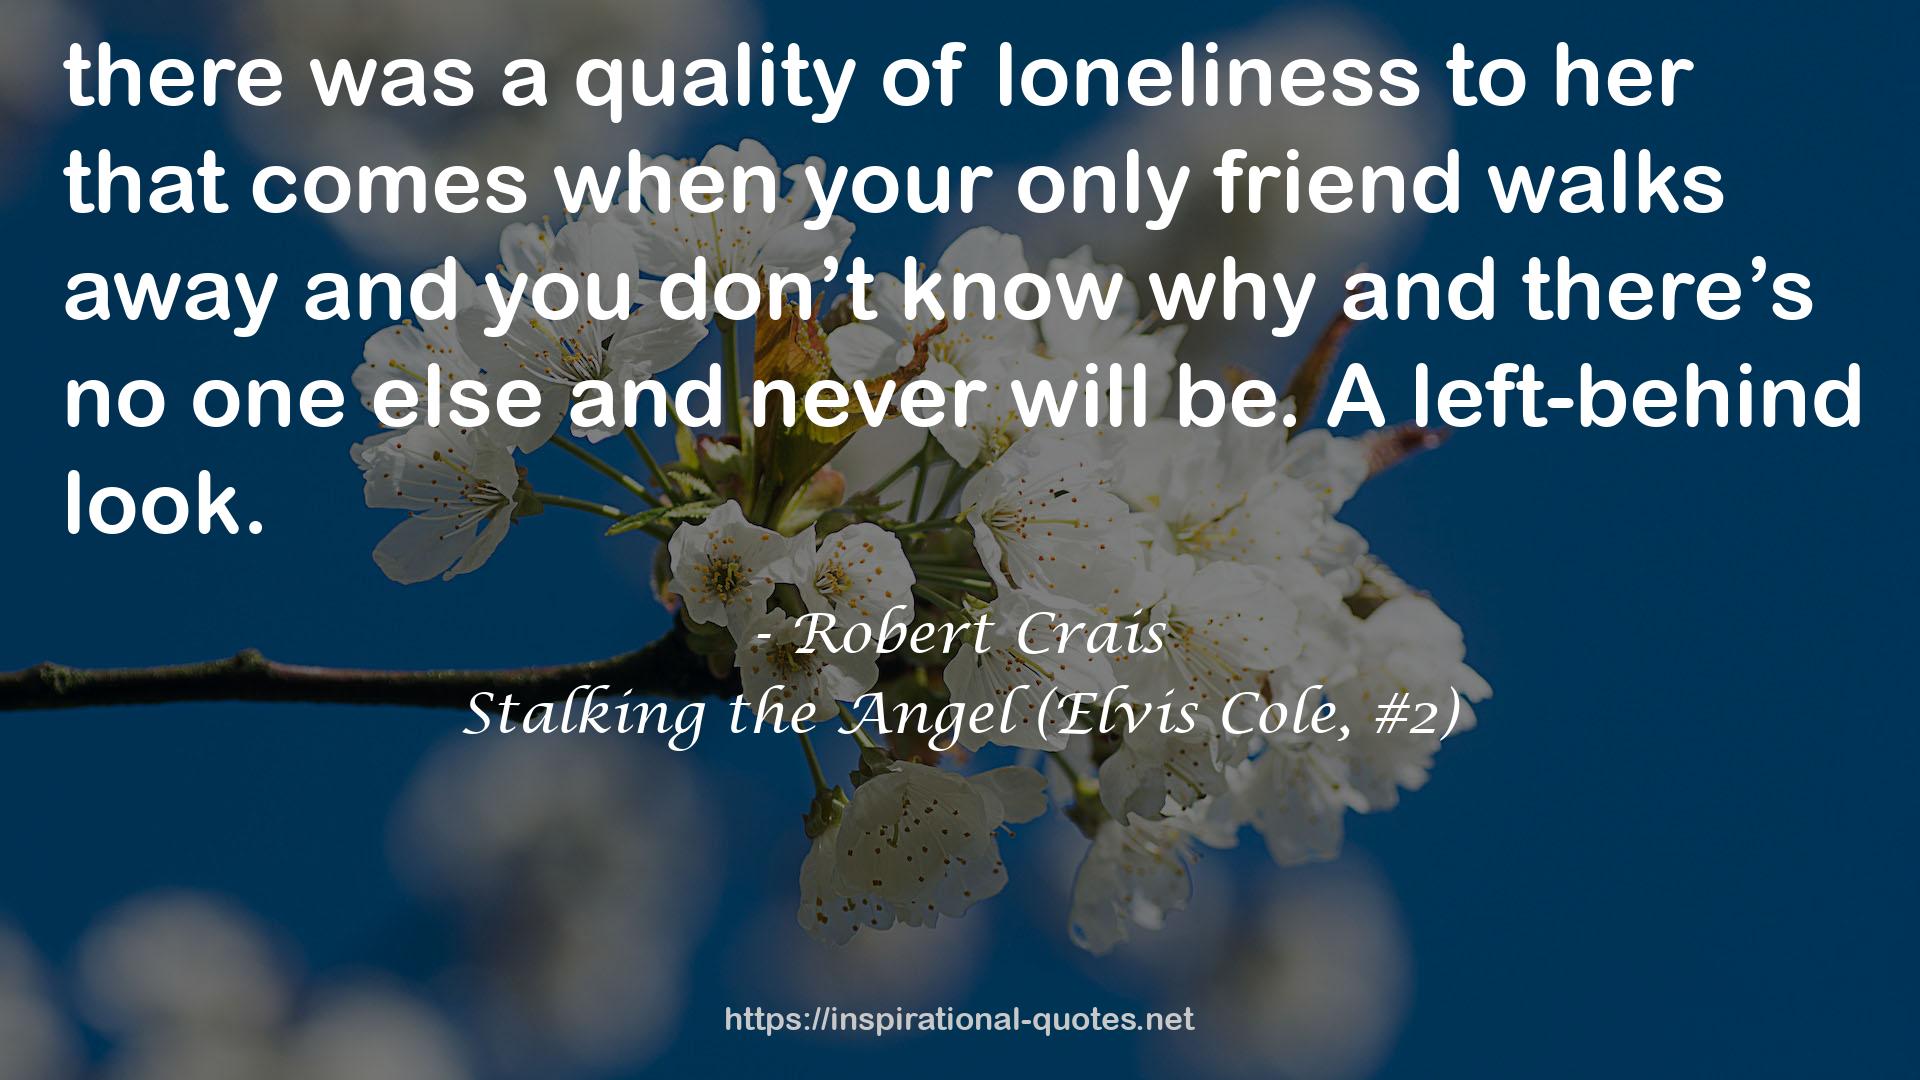 Stalking the Angel (Elvis Cole, #2) QUOTES